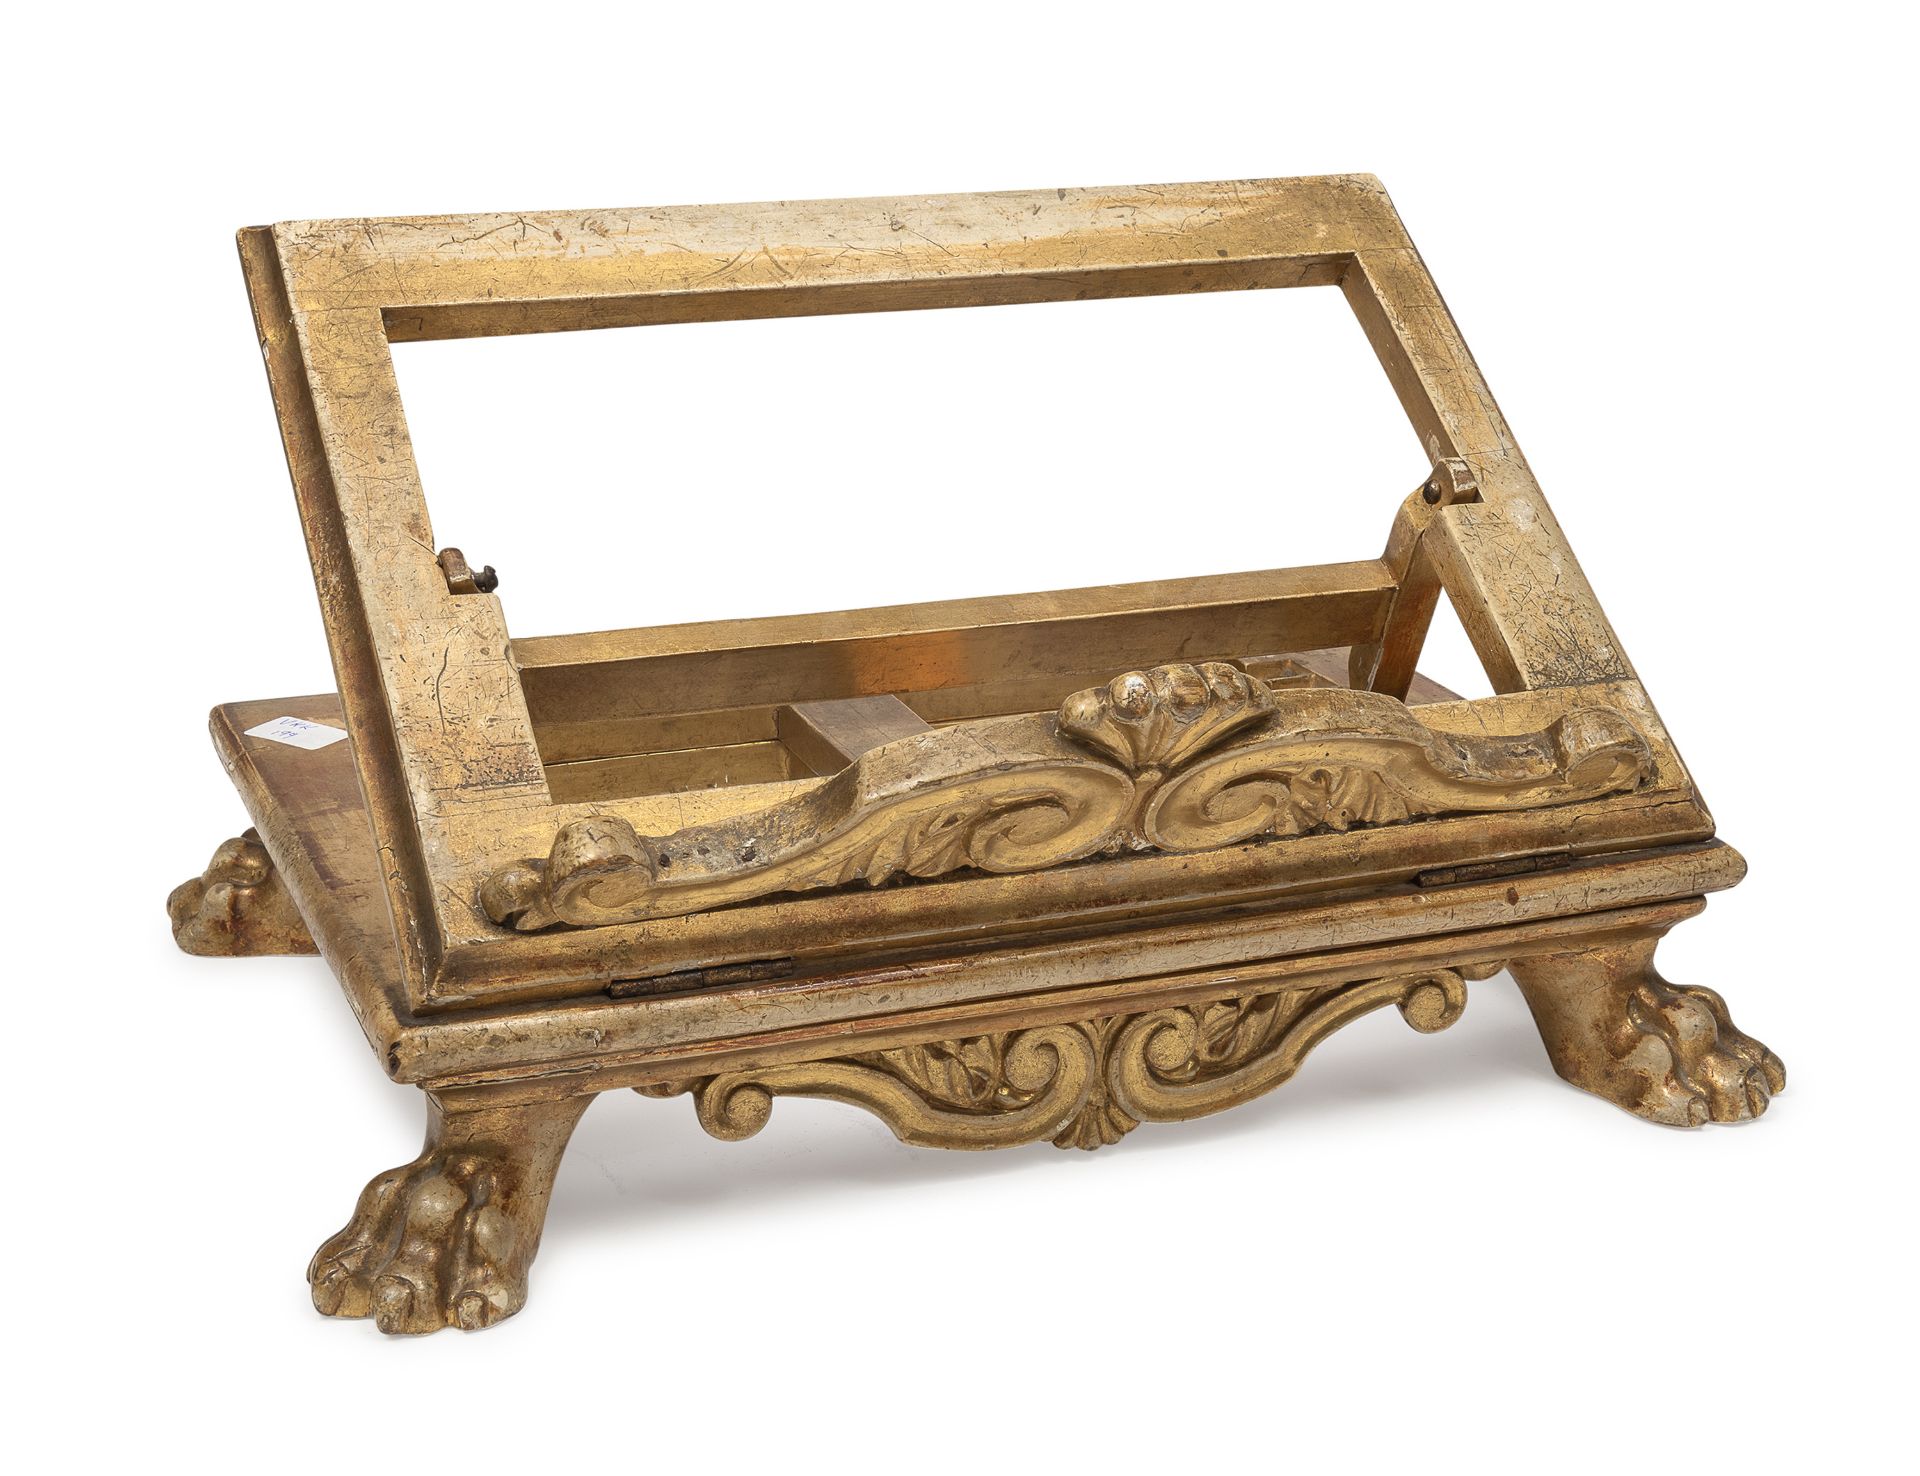 BOOKREST IN GILTWOOD LATE 18th CENTURY